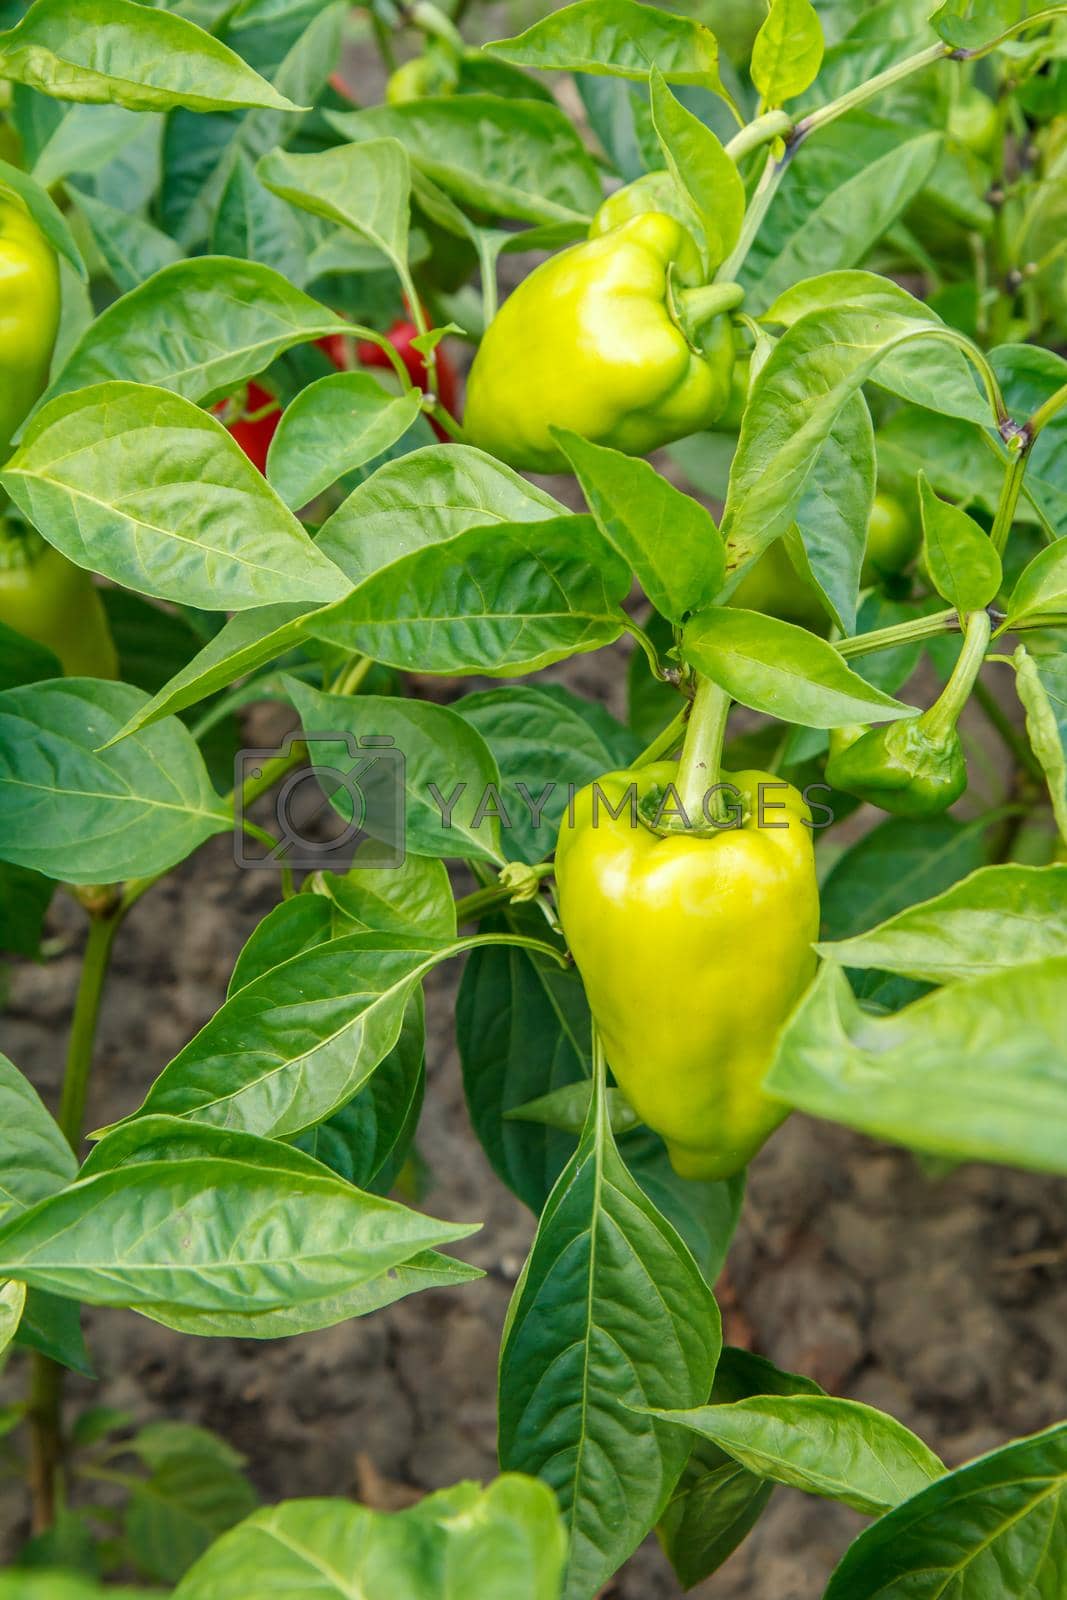 Royalty free image of Unripe bell peppers growing on bush in the garden by mvg6894